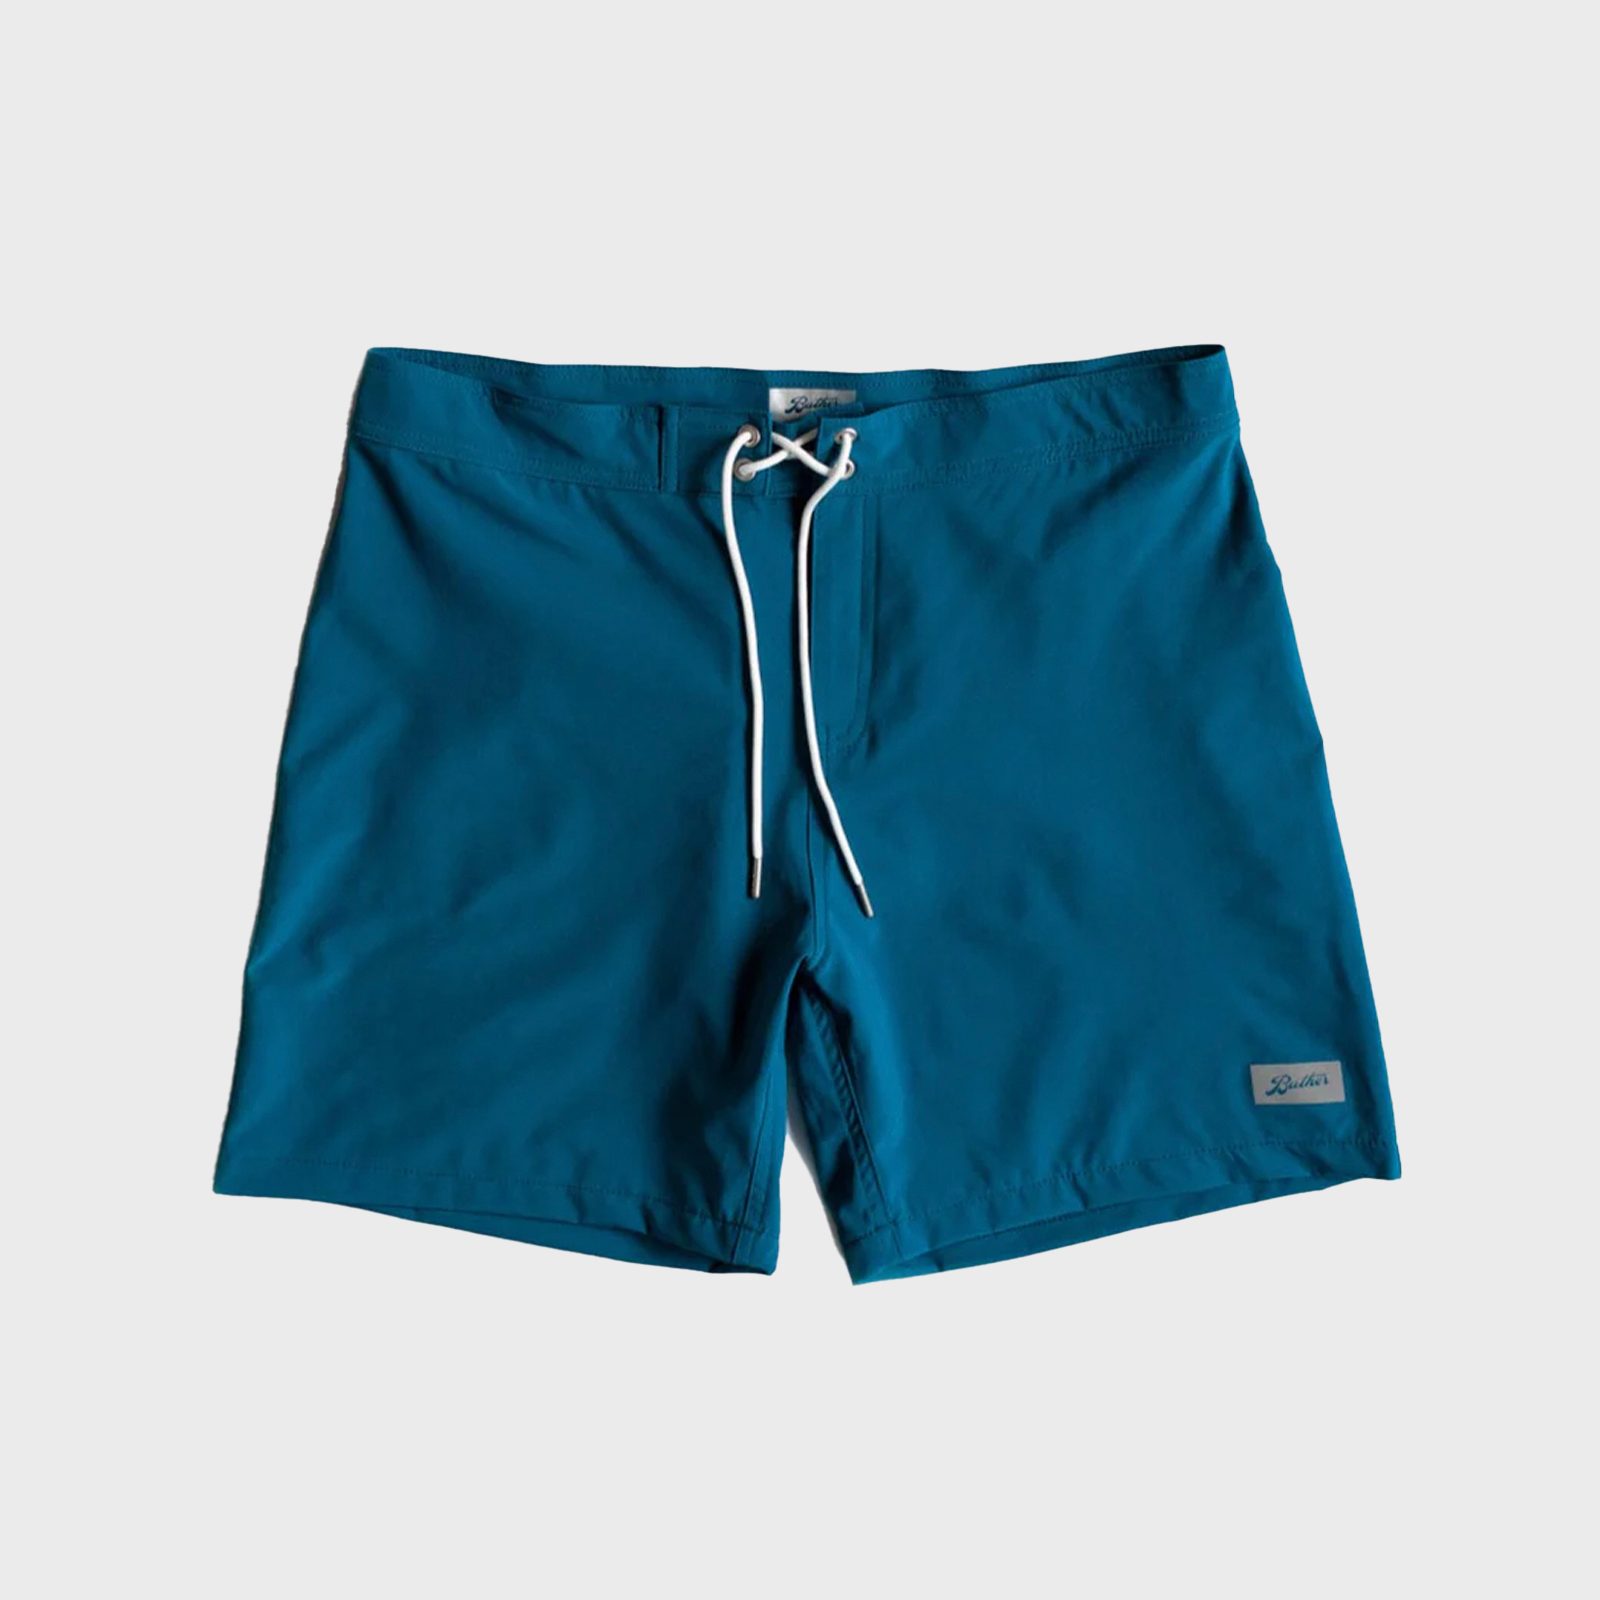 Bather Technical Surf Shorts